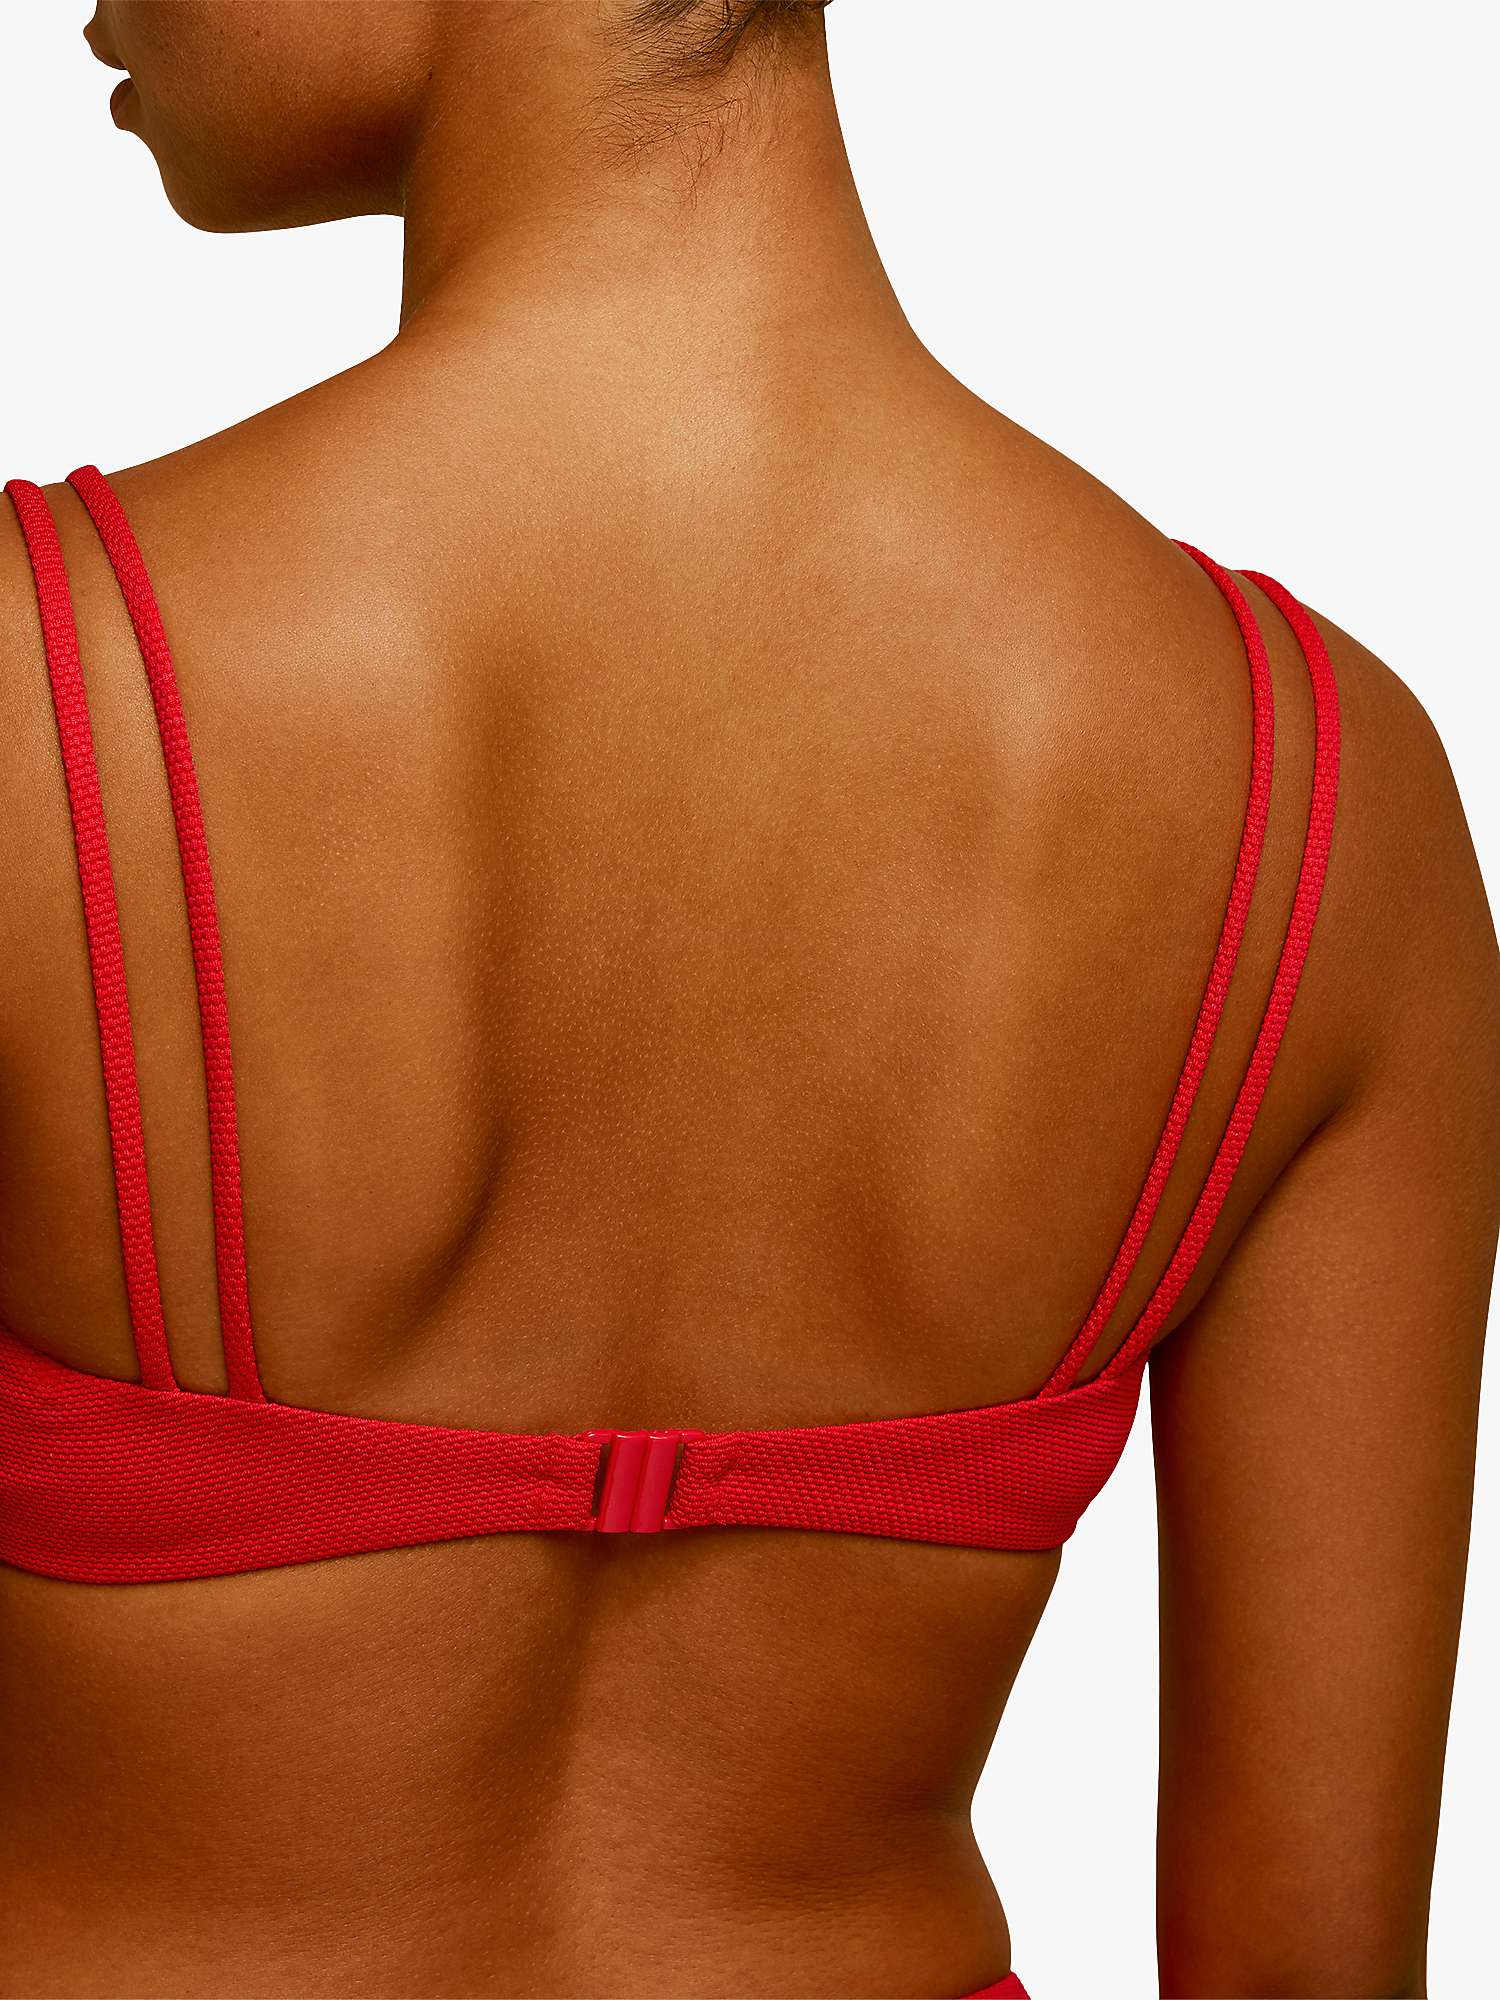 Buy Whistles Double Strap Bikini Top, Red Online at johnlewis.com